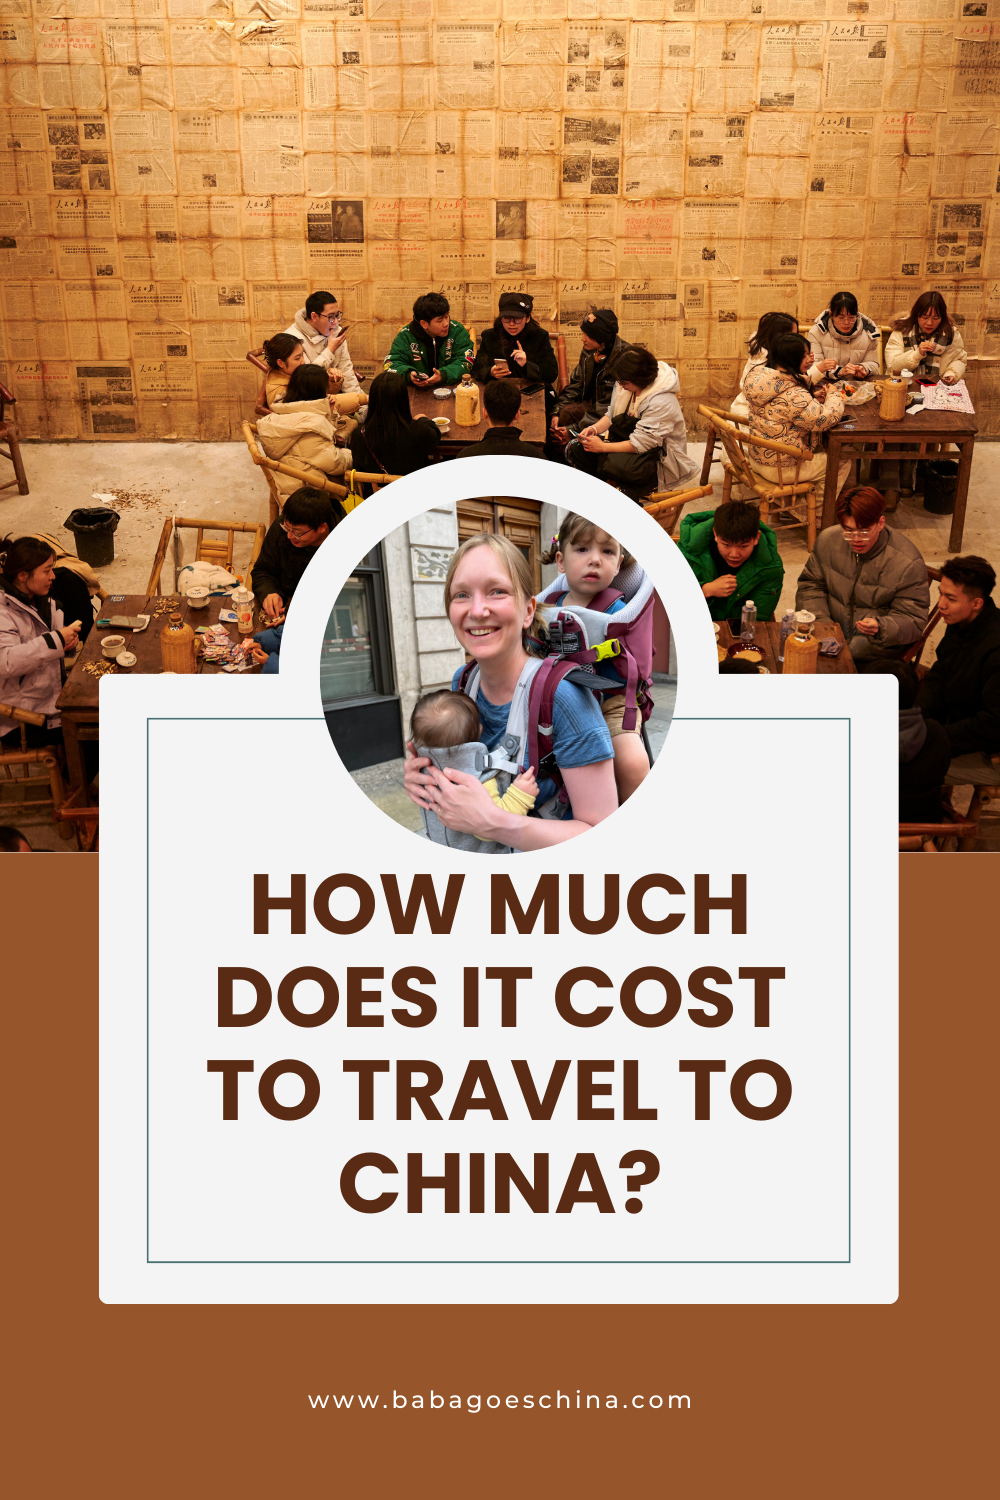 How much does it cost to travel to China?